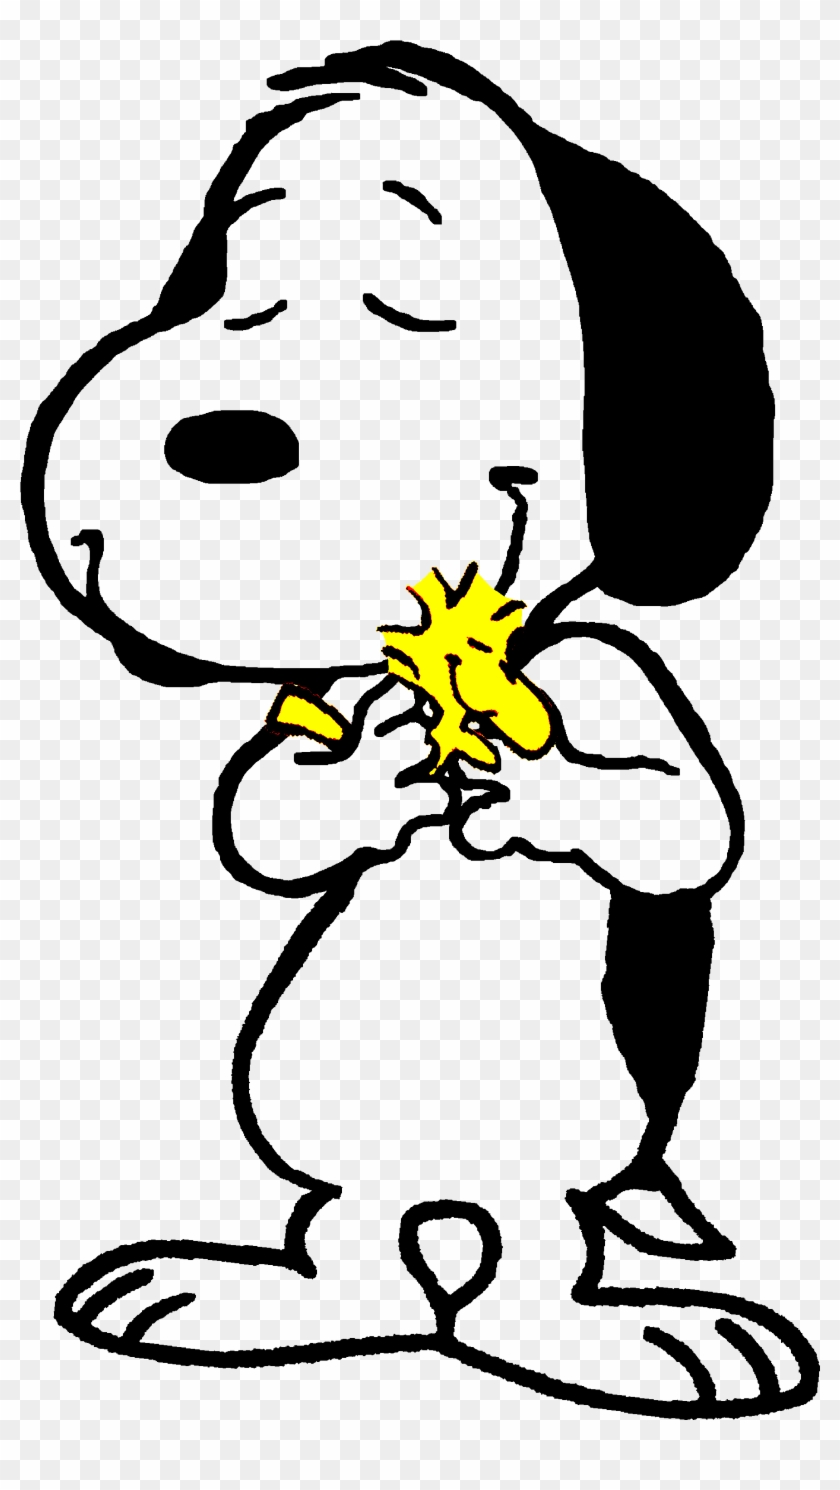 snoopy and woodstock clipart